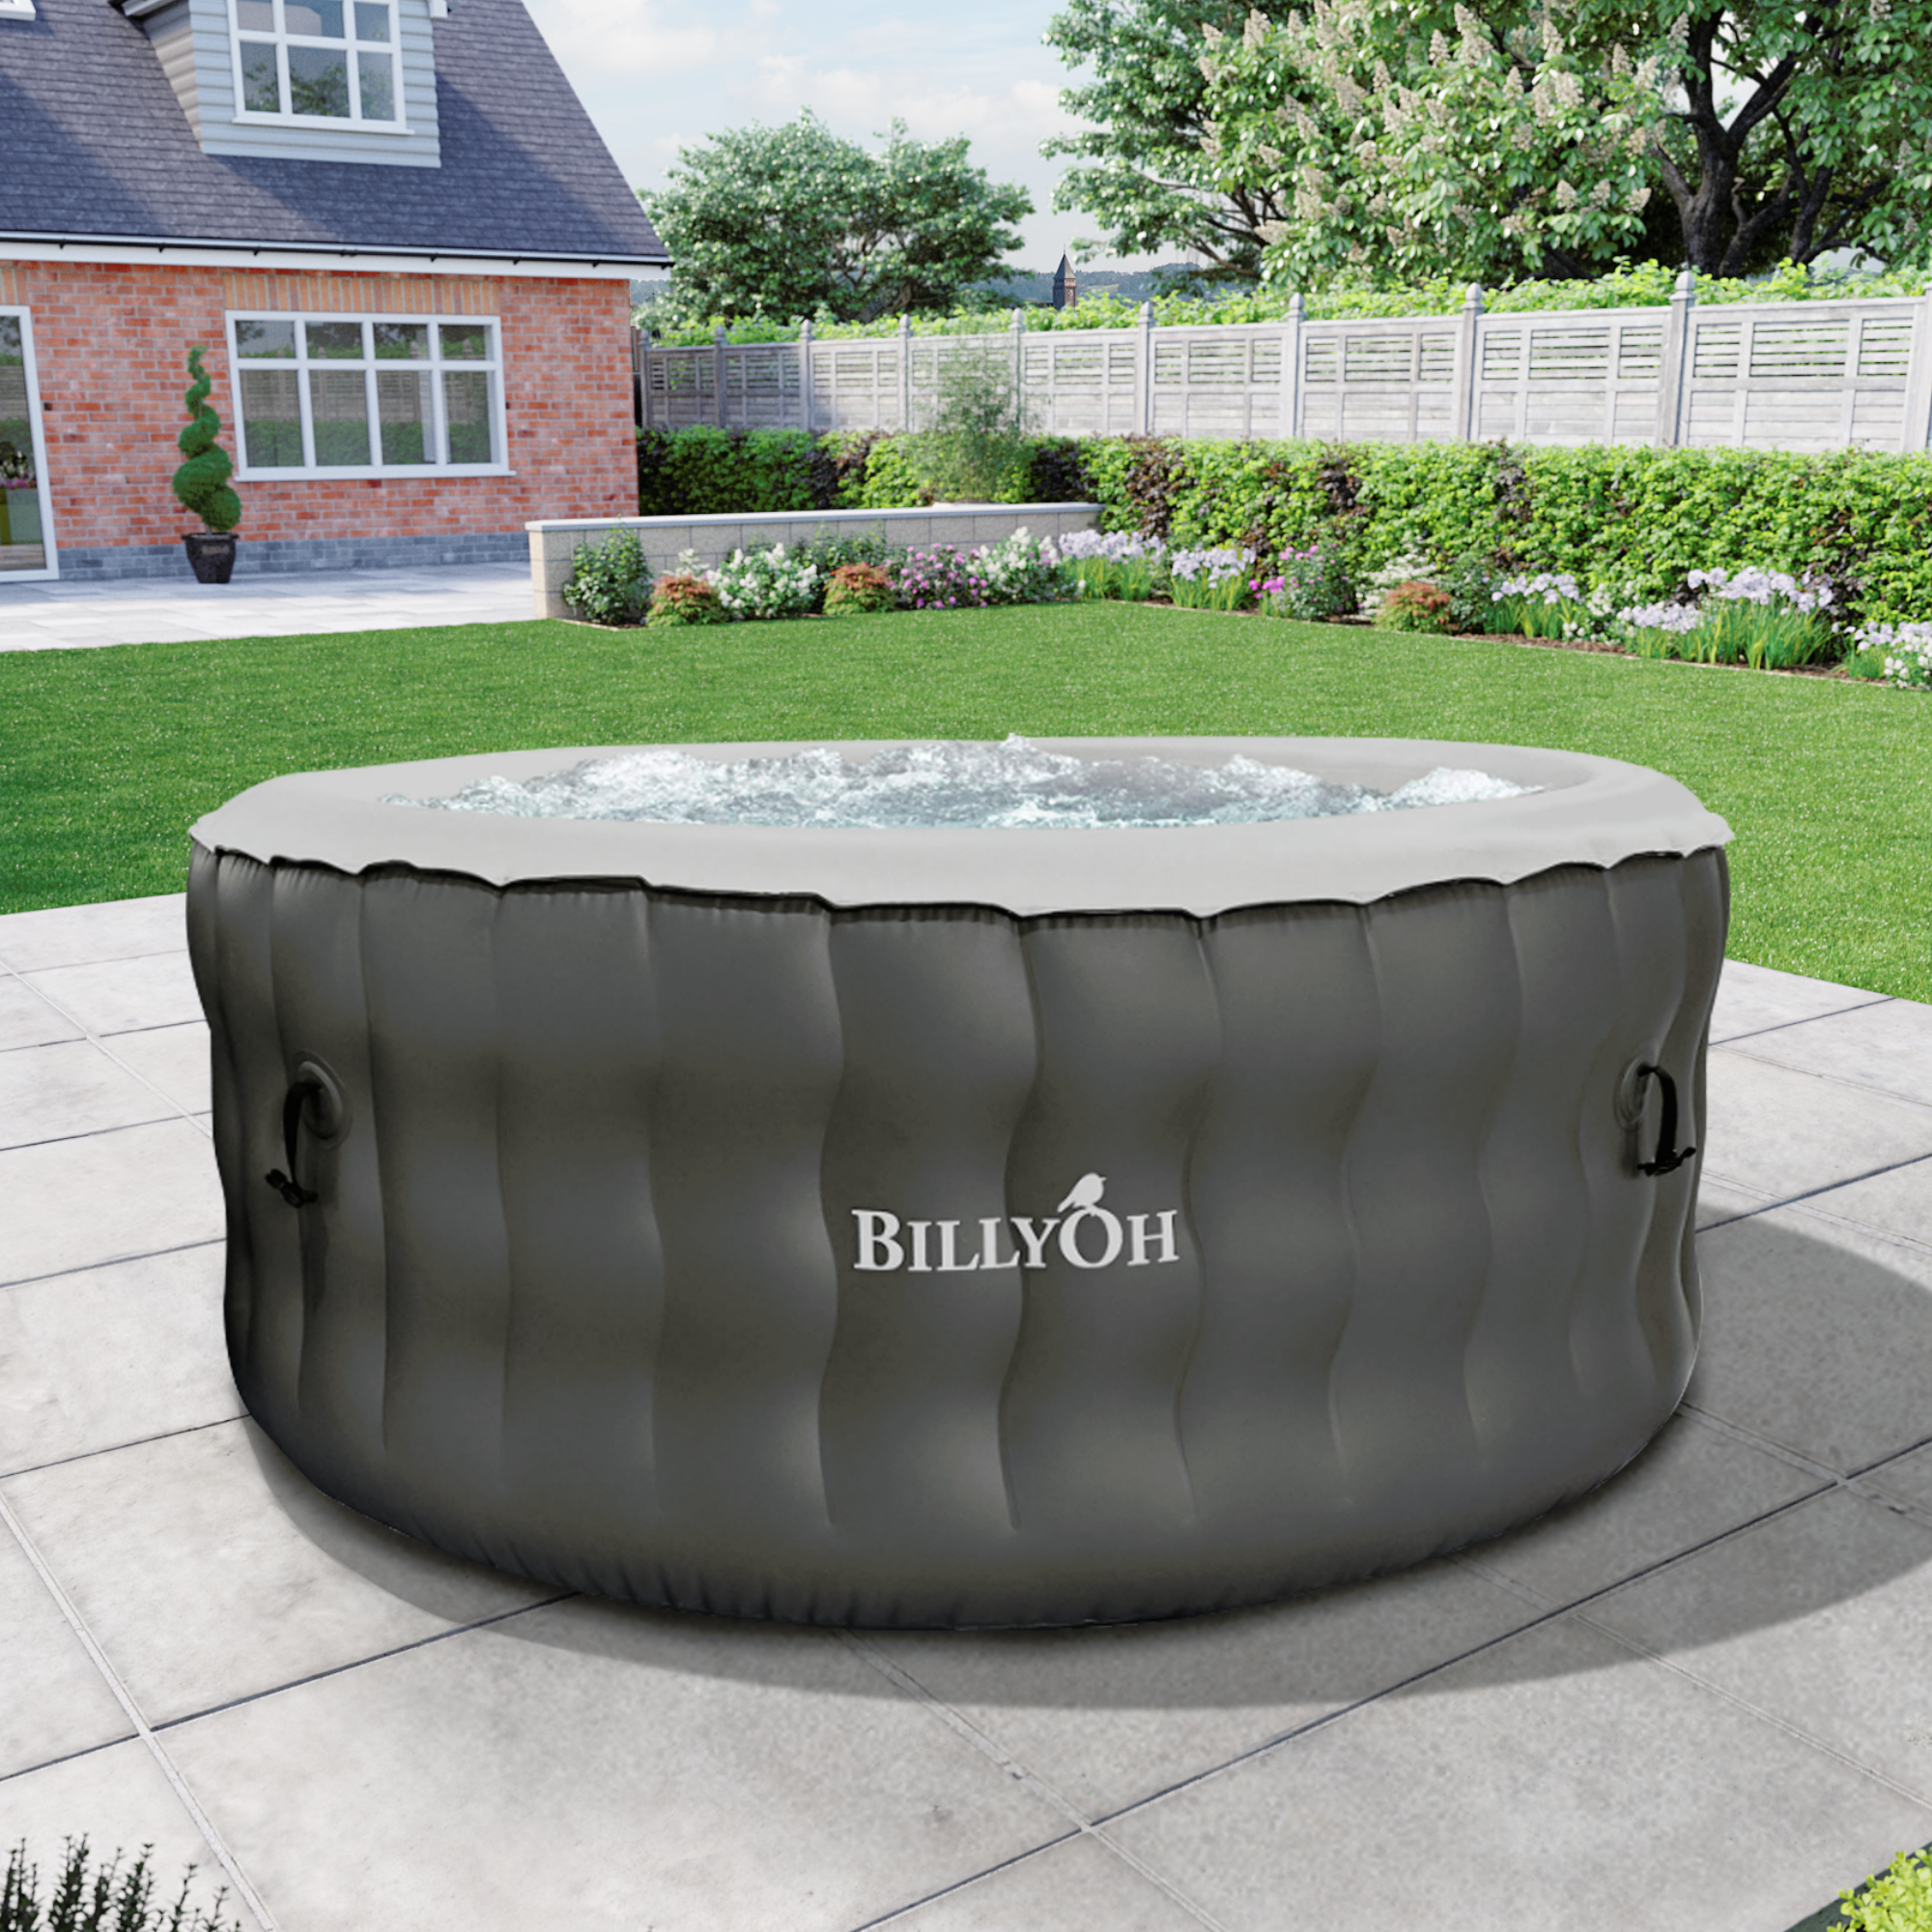 Billyoh Respiro Round Inflatable Hot Tub With Jets 2 4 People 2 4 Seater